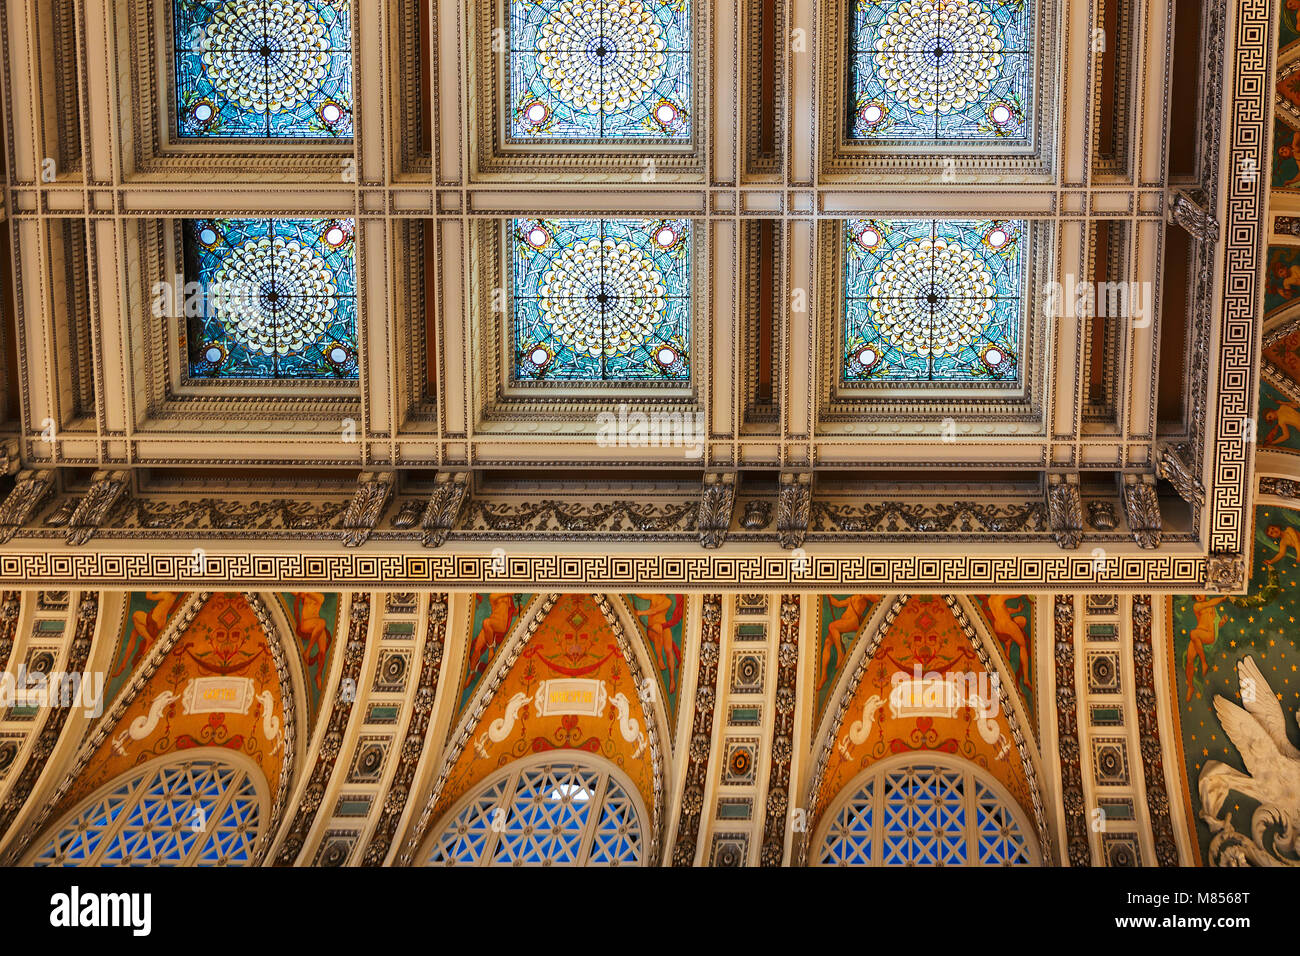 Washington D.C., USA, october 2016: decorated ceiling inside the great hall of the library of congress in Washington D.C., USA Stock Photo